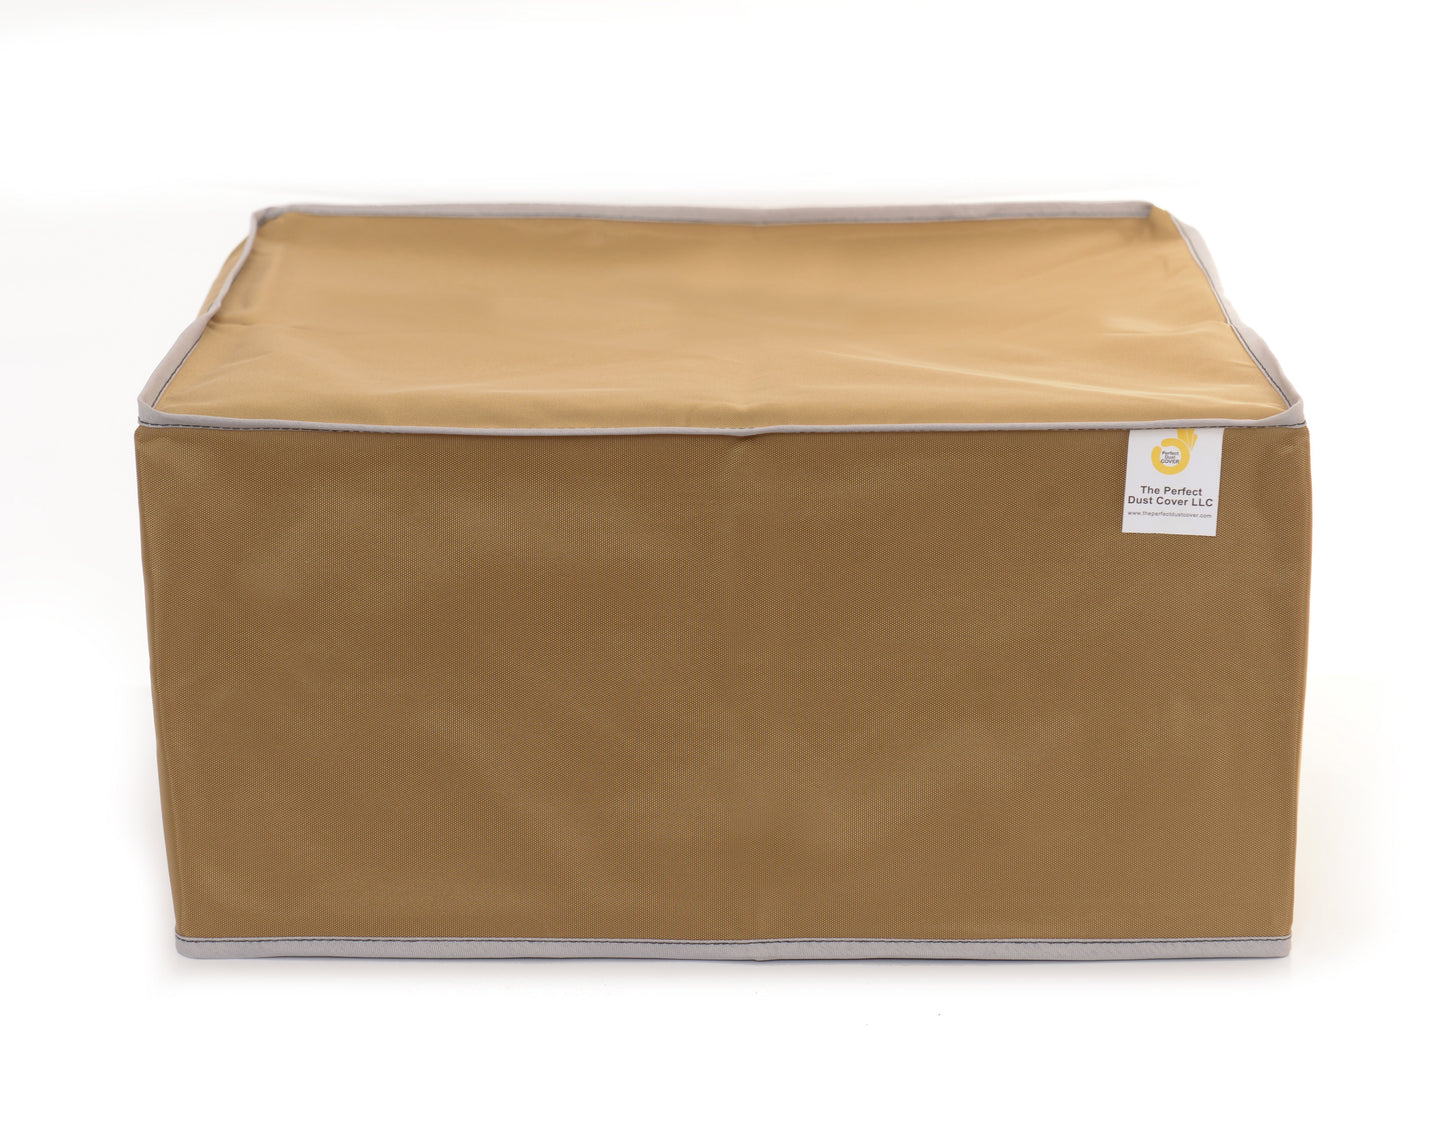 The Perfect Dust Cover, Tan Nylon Cover for HP OfficeJet Pro 8600 e-All-in-One Wireless Printer, Anti Static and Waterproof Cover Dimensions 19.4''W x 16.3''D x 12''H by The Perfect Dust Cover LLC